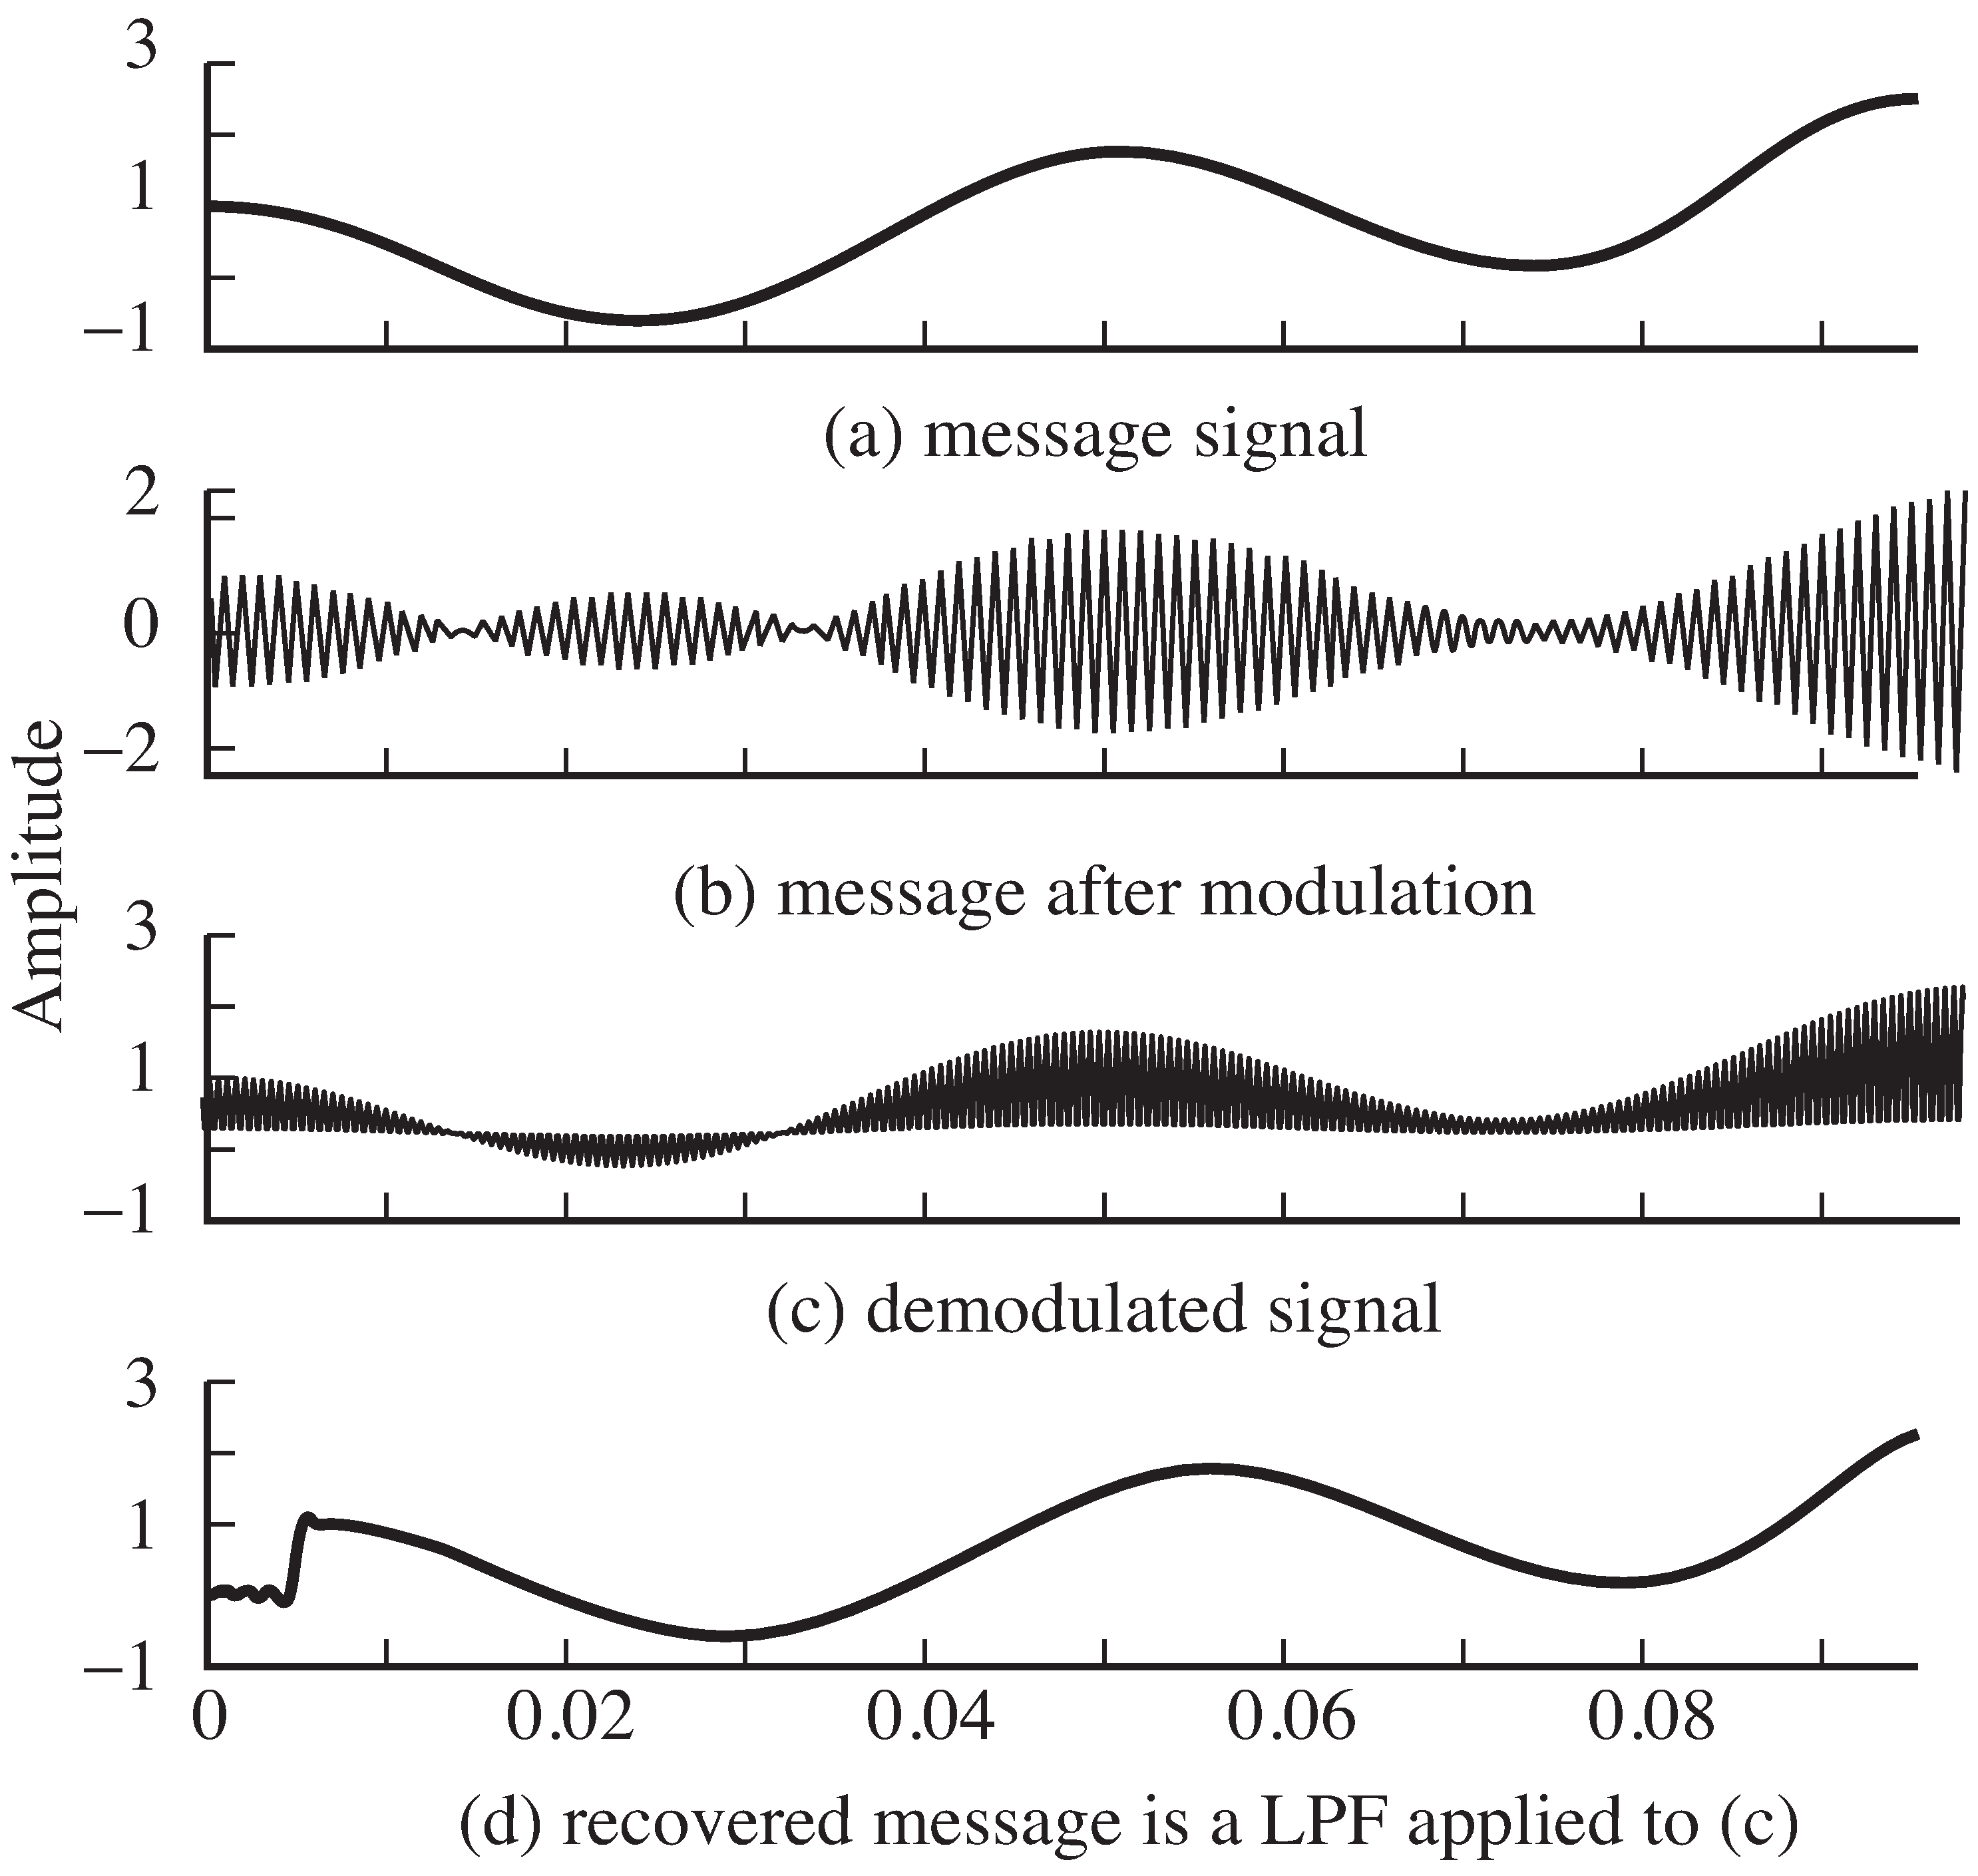 The message signal in the top frame is modulated to produce the signal in the second plot. Demodulation gives the signal in the third plot, and the LPF recovers the original message (with delay) in the bottom plot.